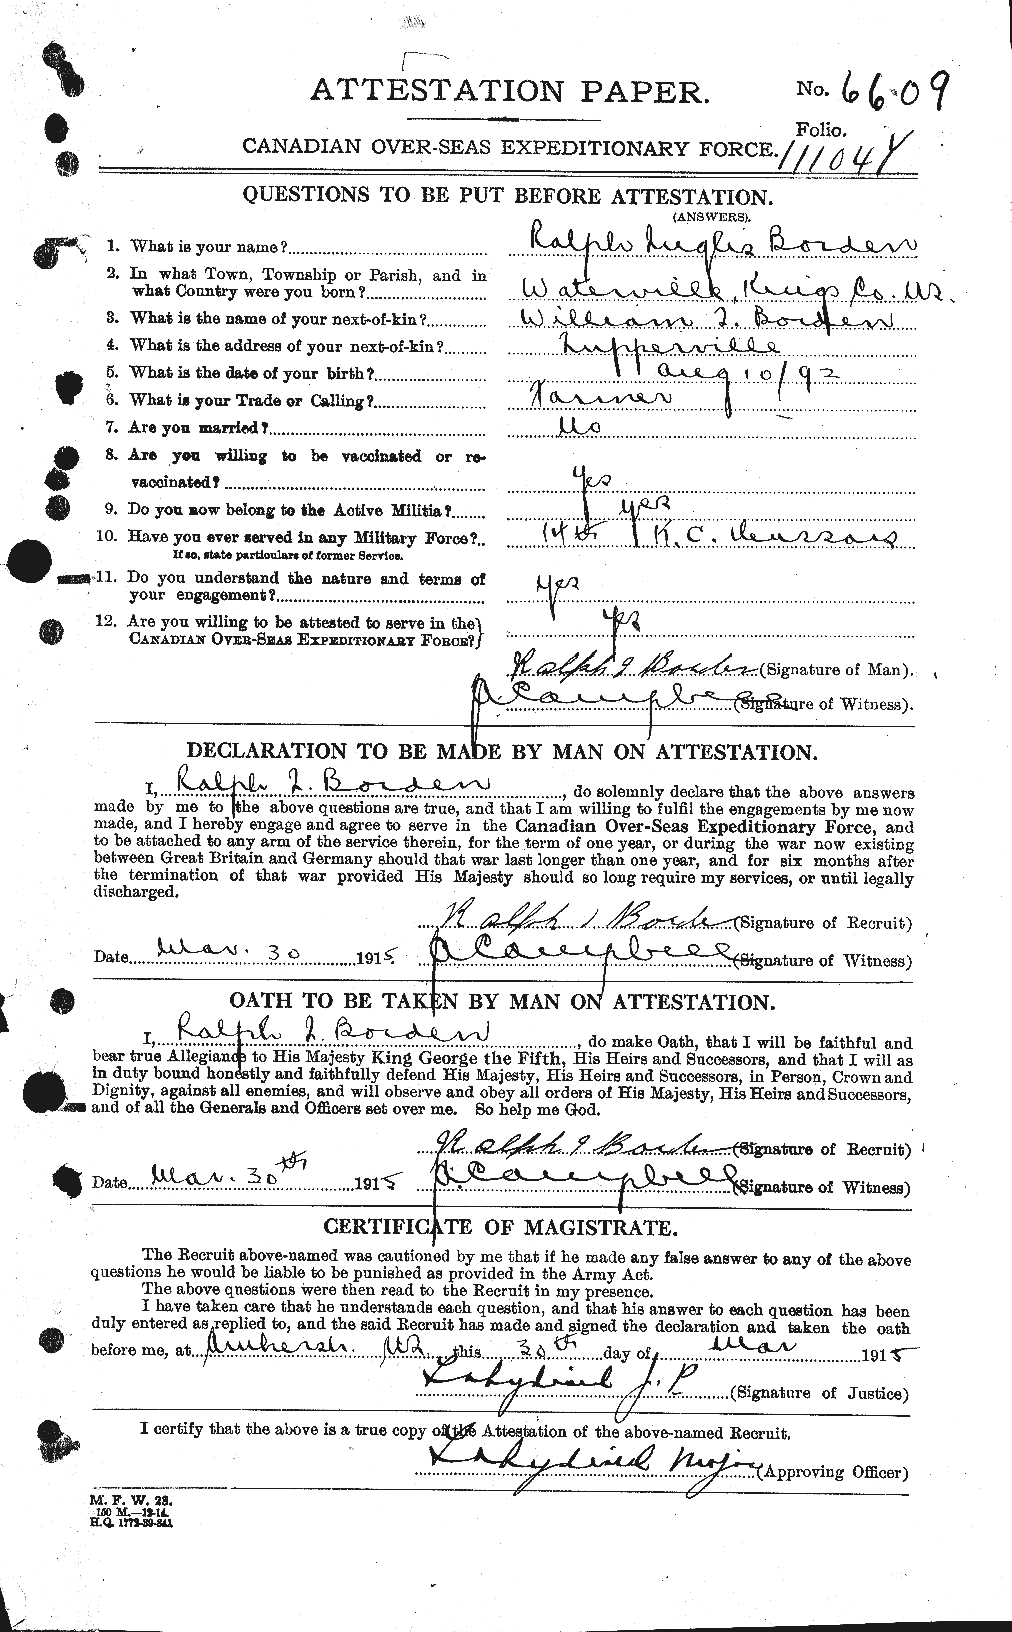 Personnel Records of the First World War - CEF 252311a